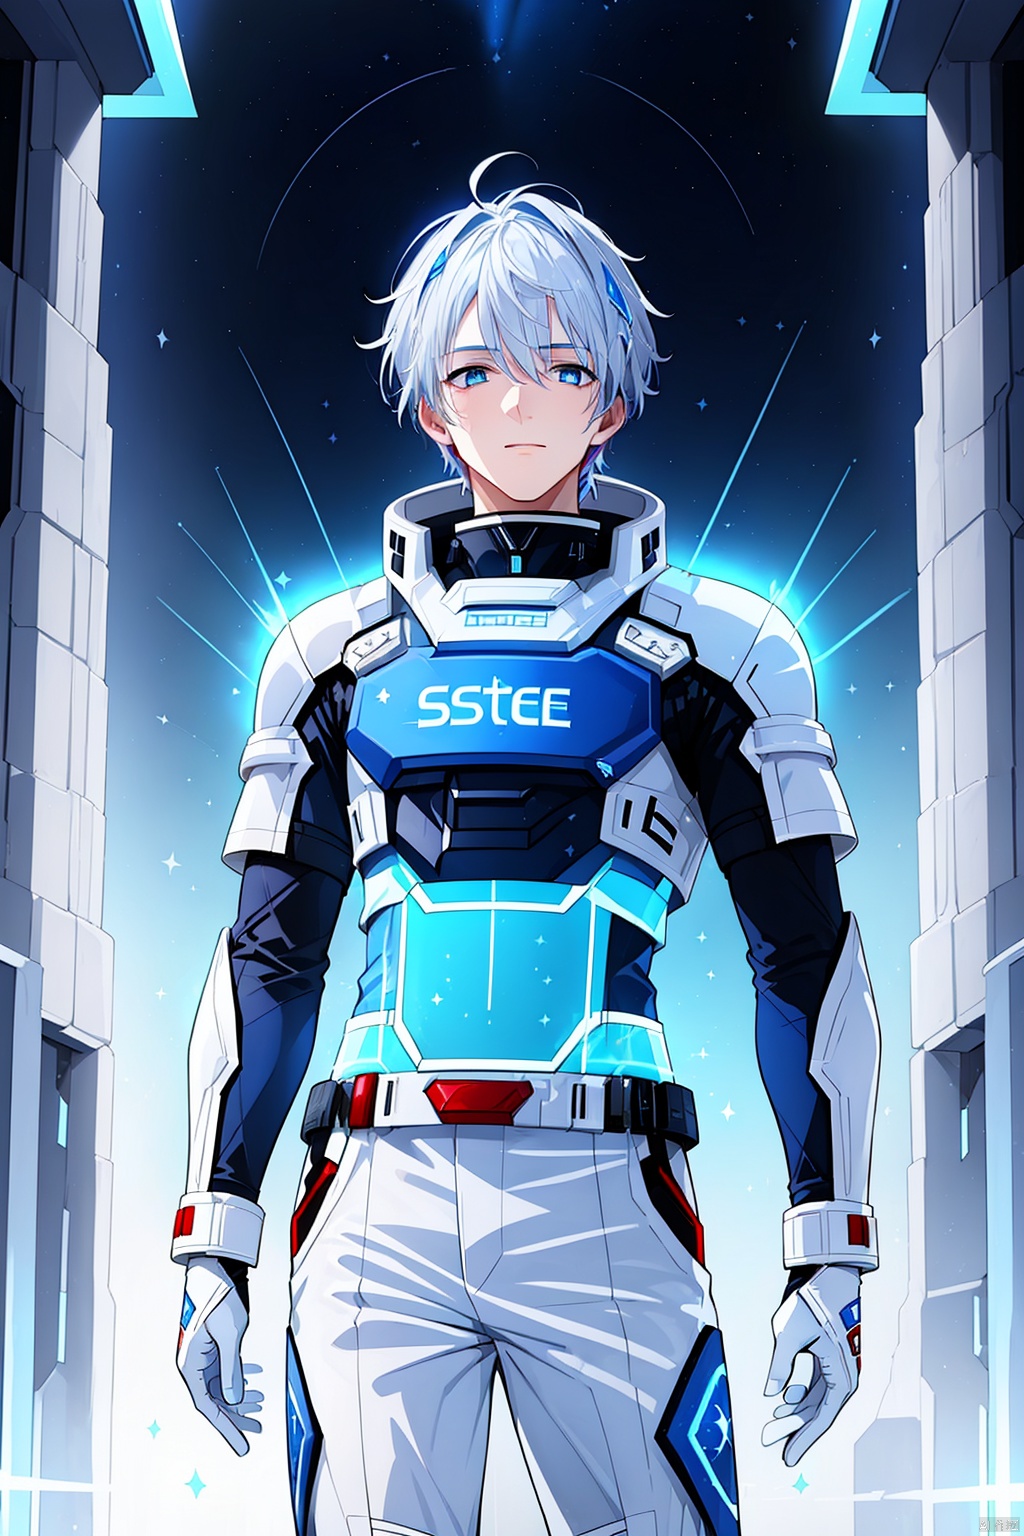  1 boy, blue eyes, white hair, red space suit, (bust: 1.3), dynamic pose, HD, 32k, (Masterpiece: 1.5), 